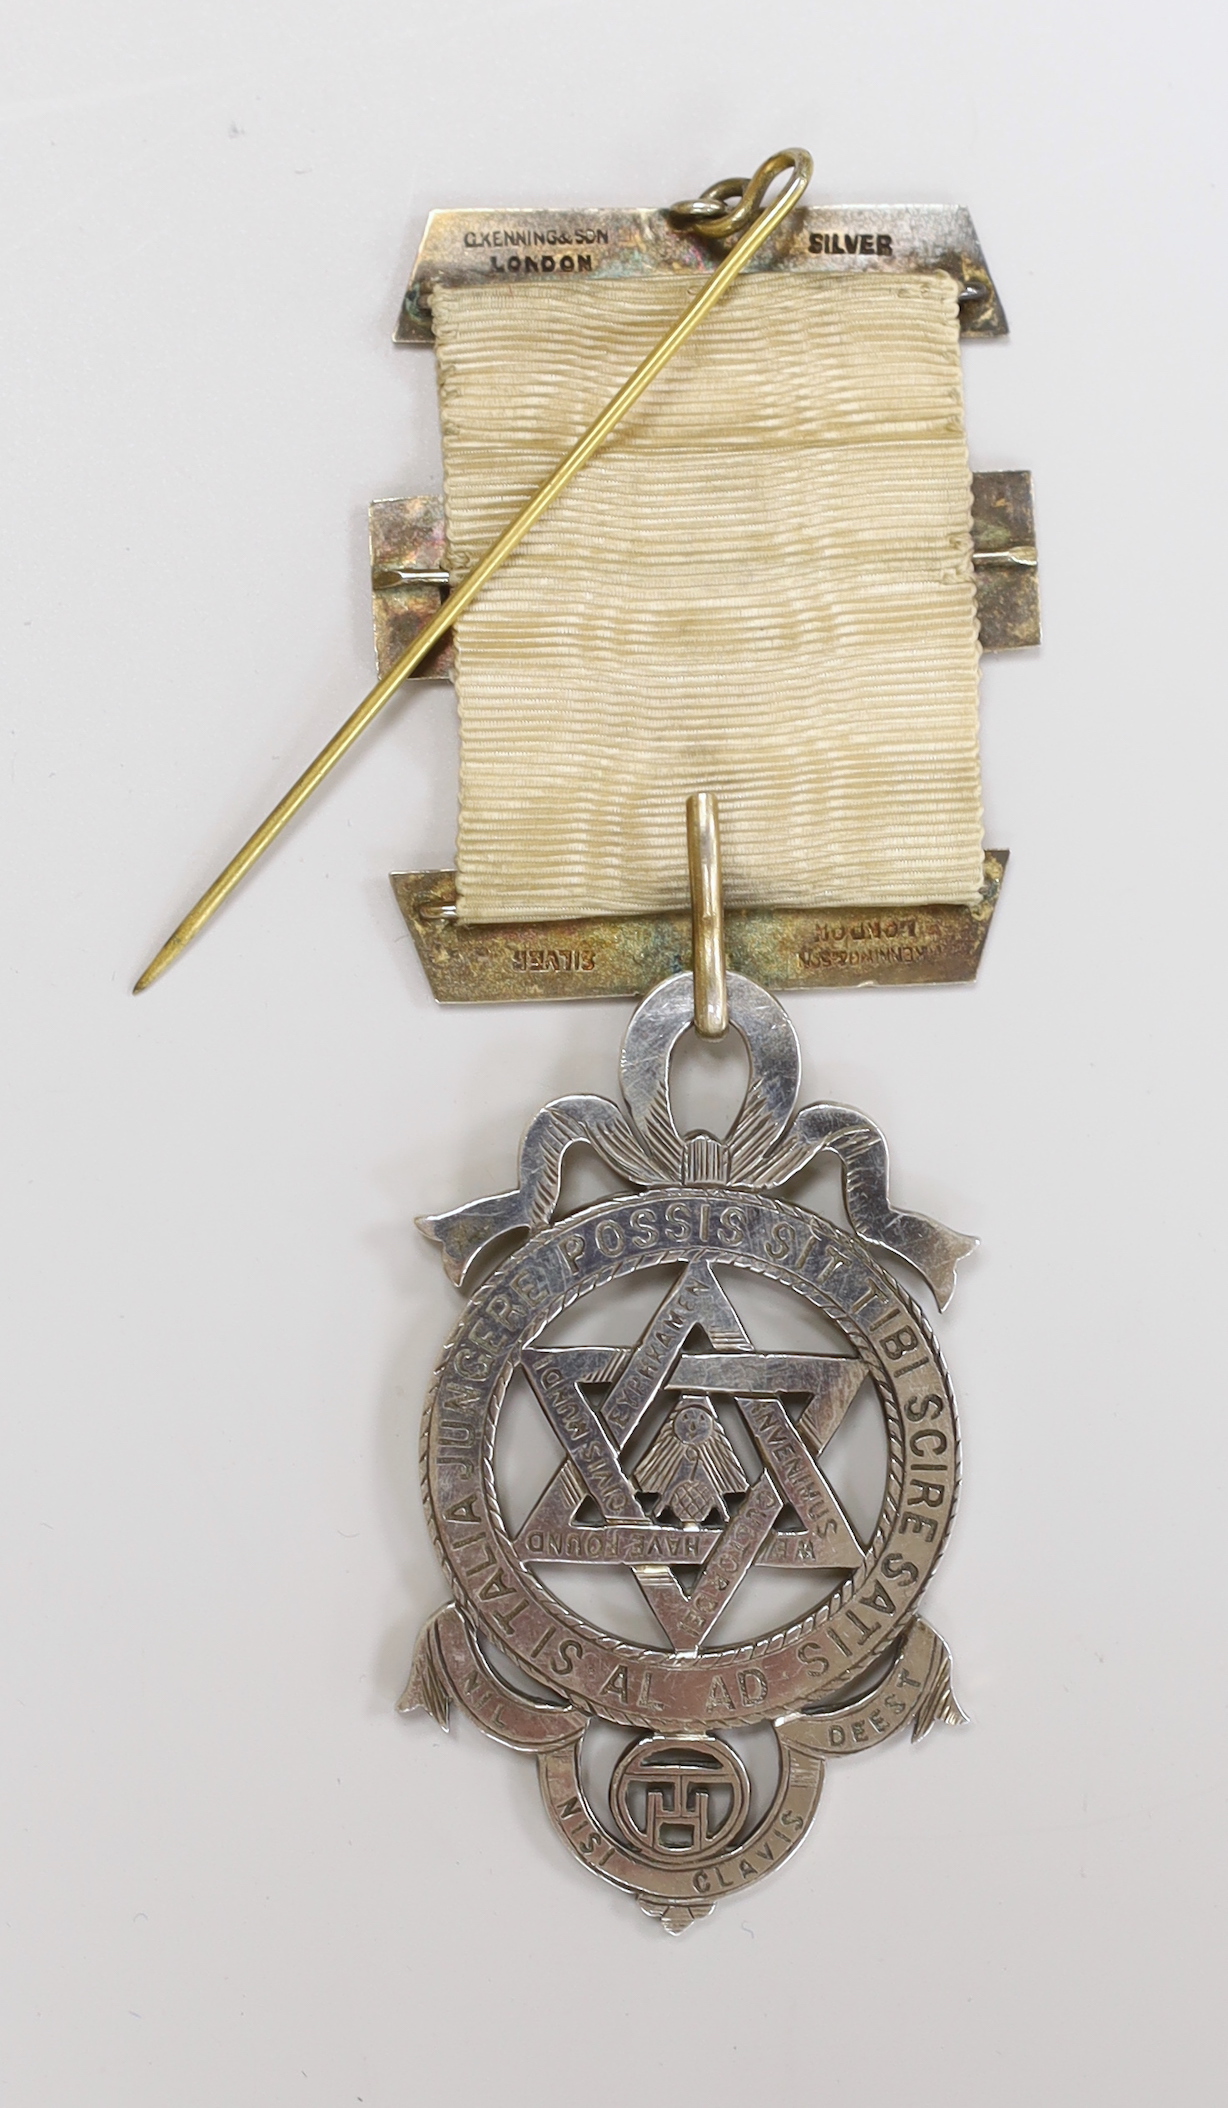 A boxed Masonic silver medal